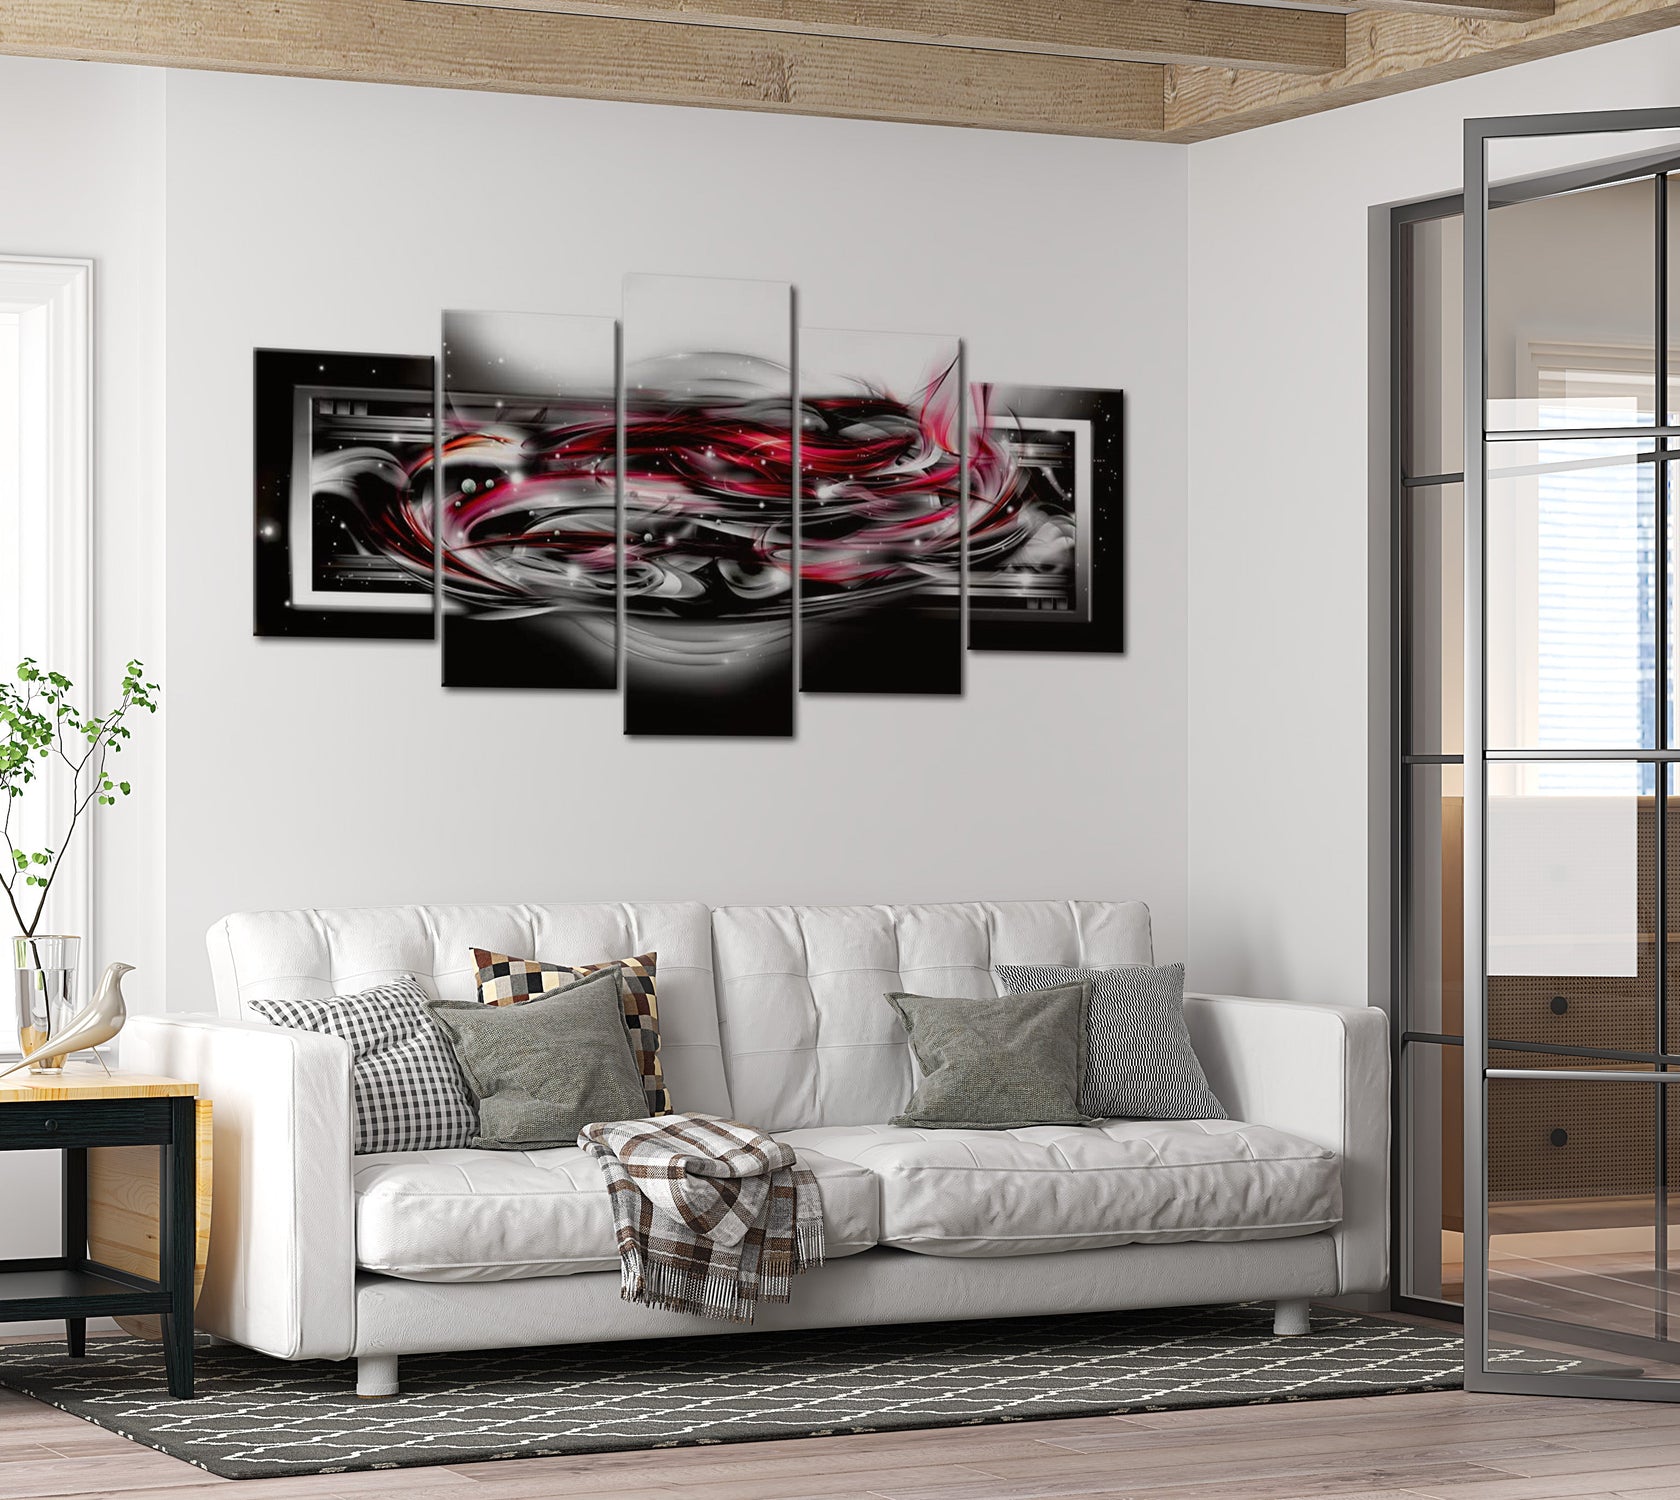 Glamour Canvas Wall Art - Carmine Ribbons - 5 Pieces